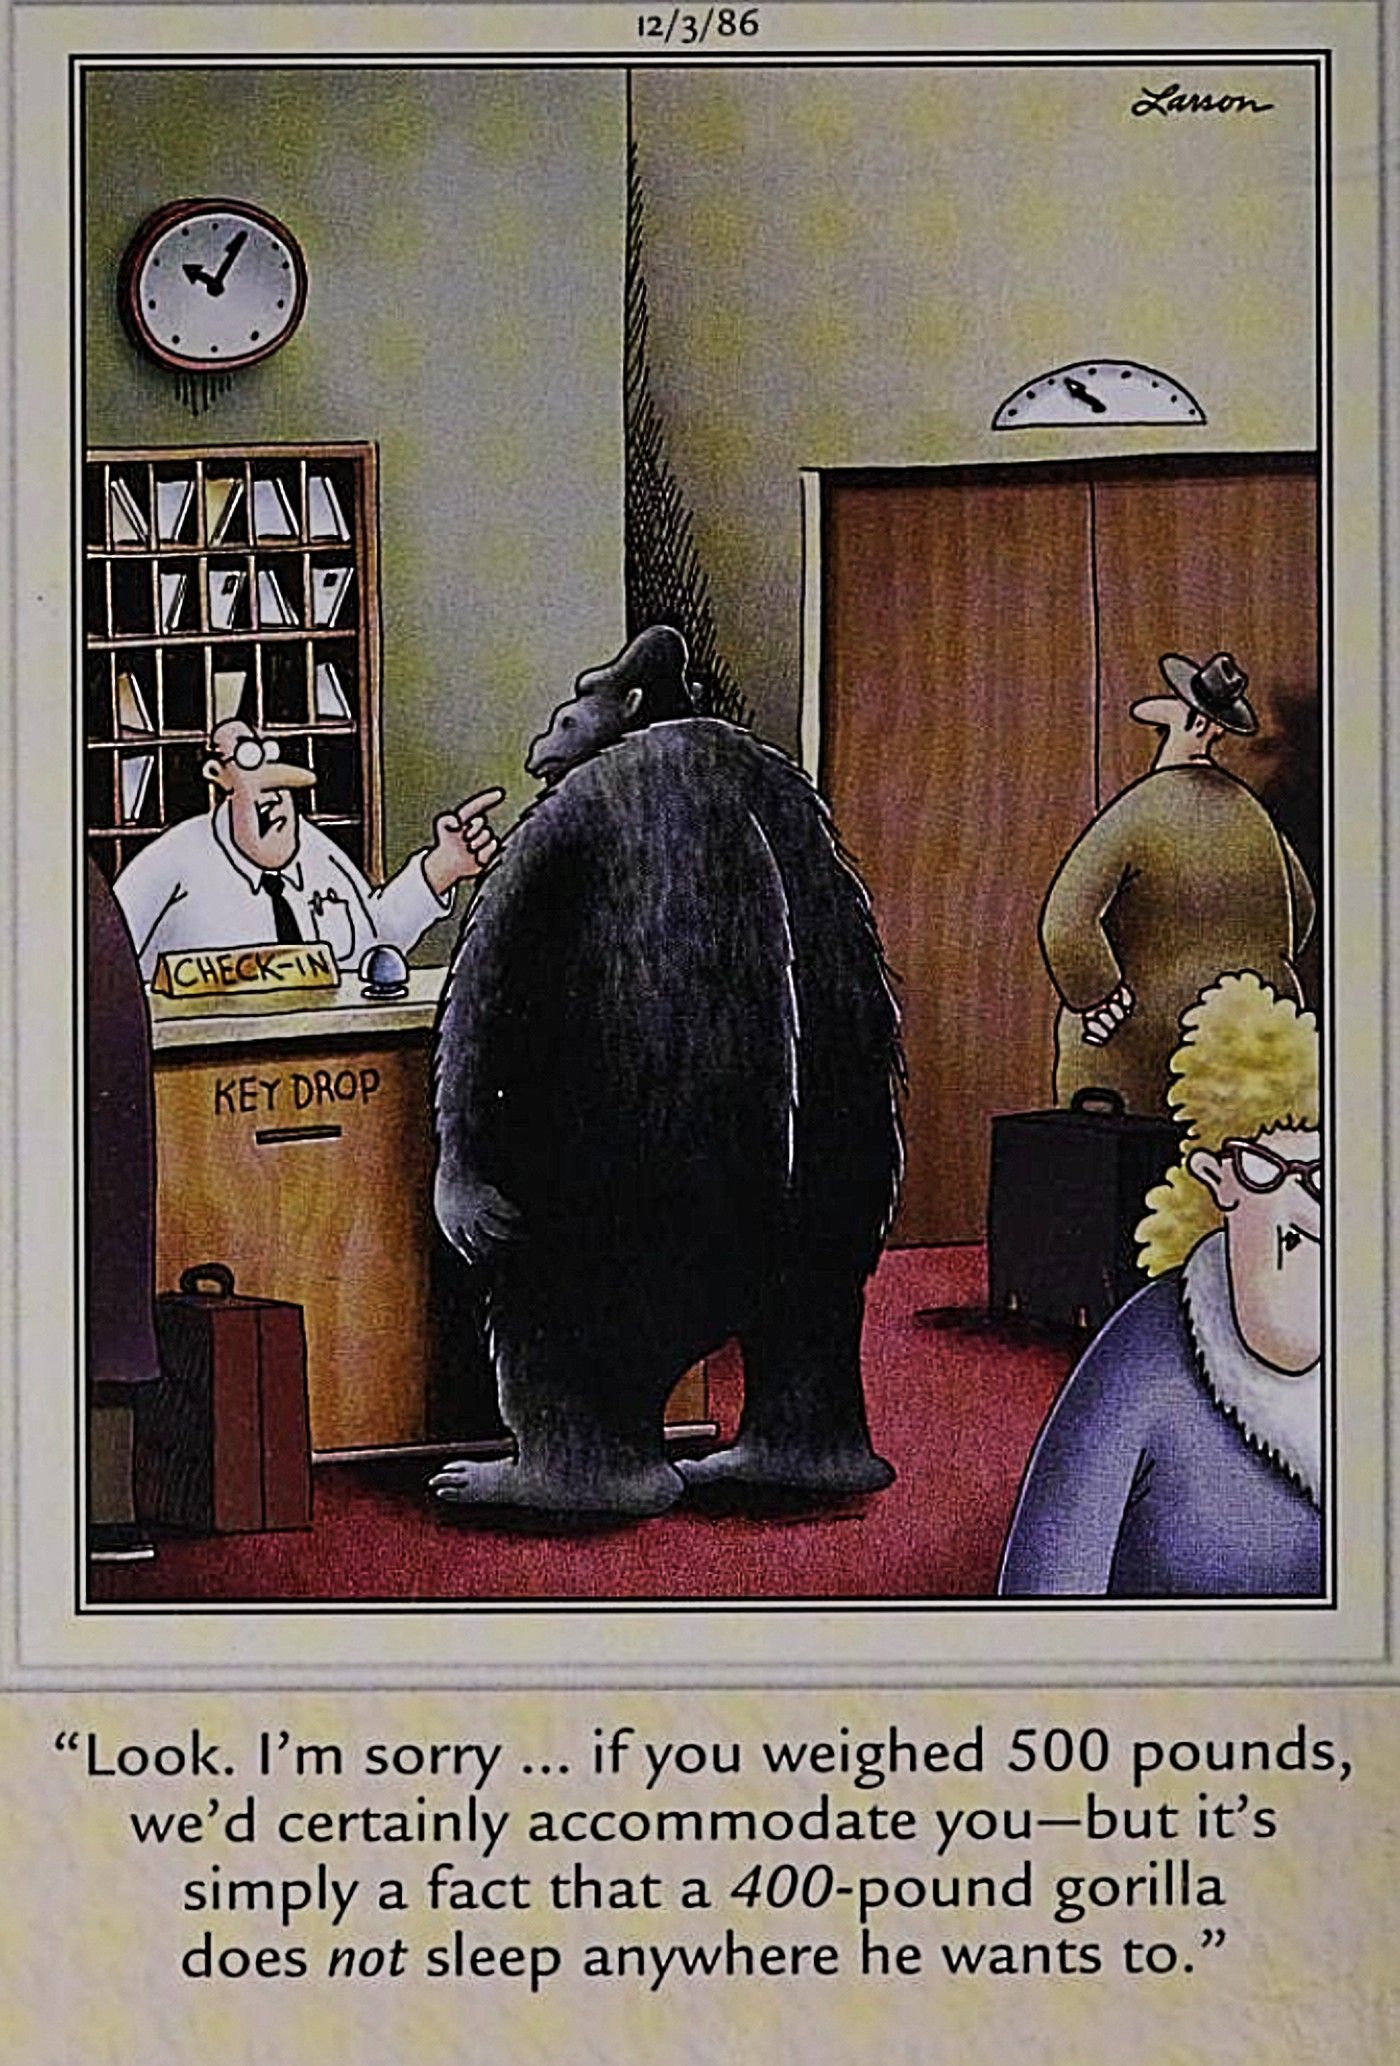 Far Side, gorilla discriminated against for their weight